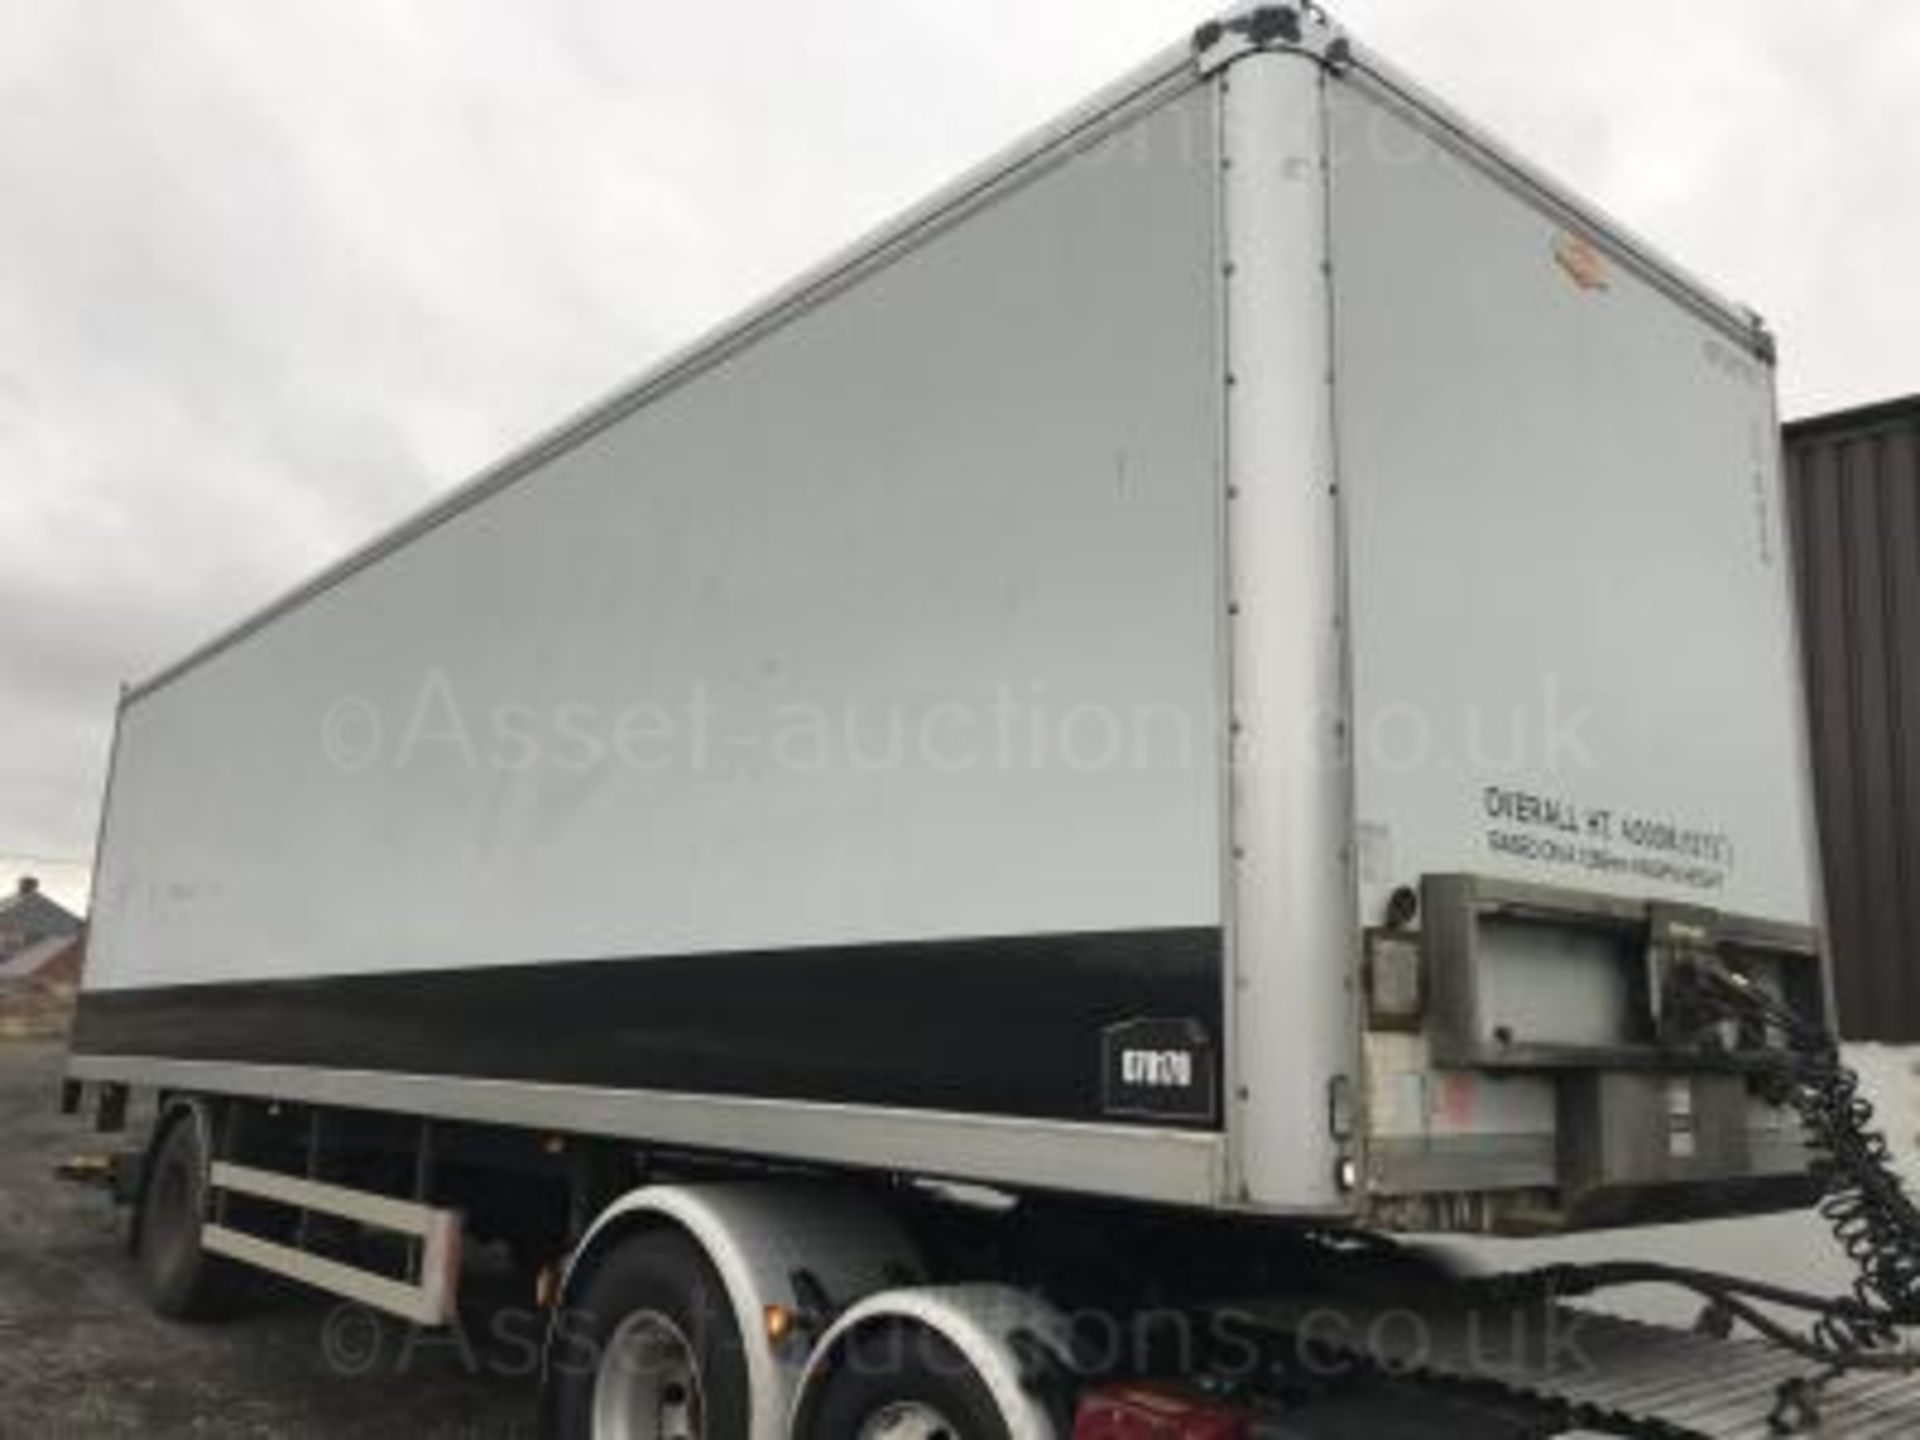 2007 DONBUR SINGLE AXLE TRAILER WITH TAIL LIFT, GOOD CONDITION *PLUS VAT* - Image 2 of 22